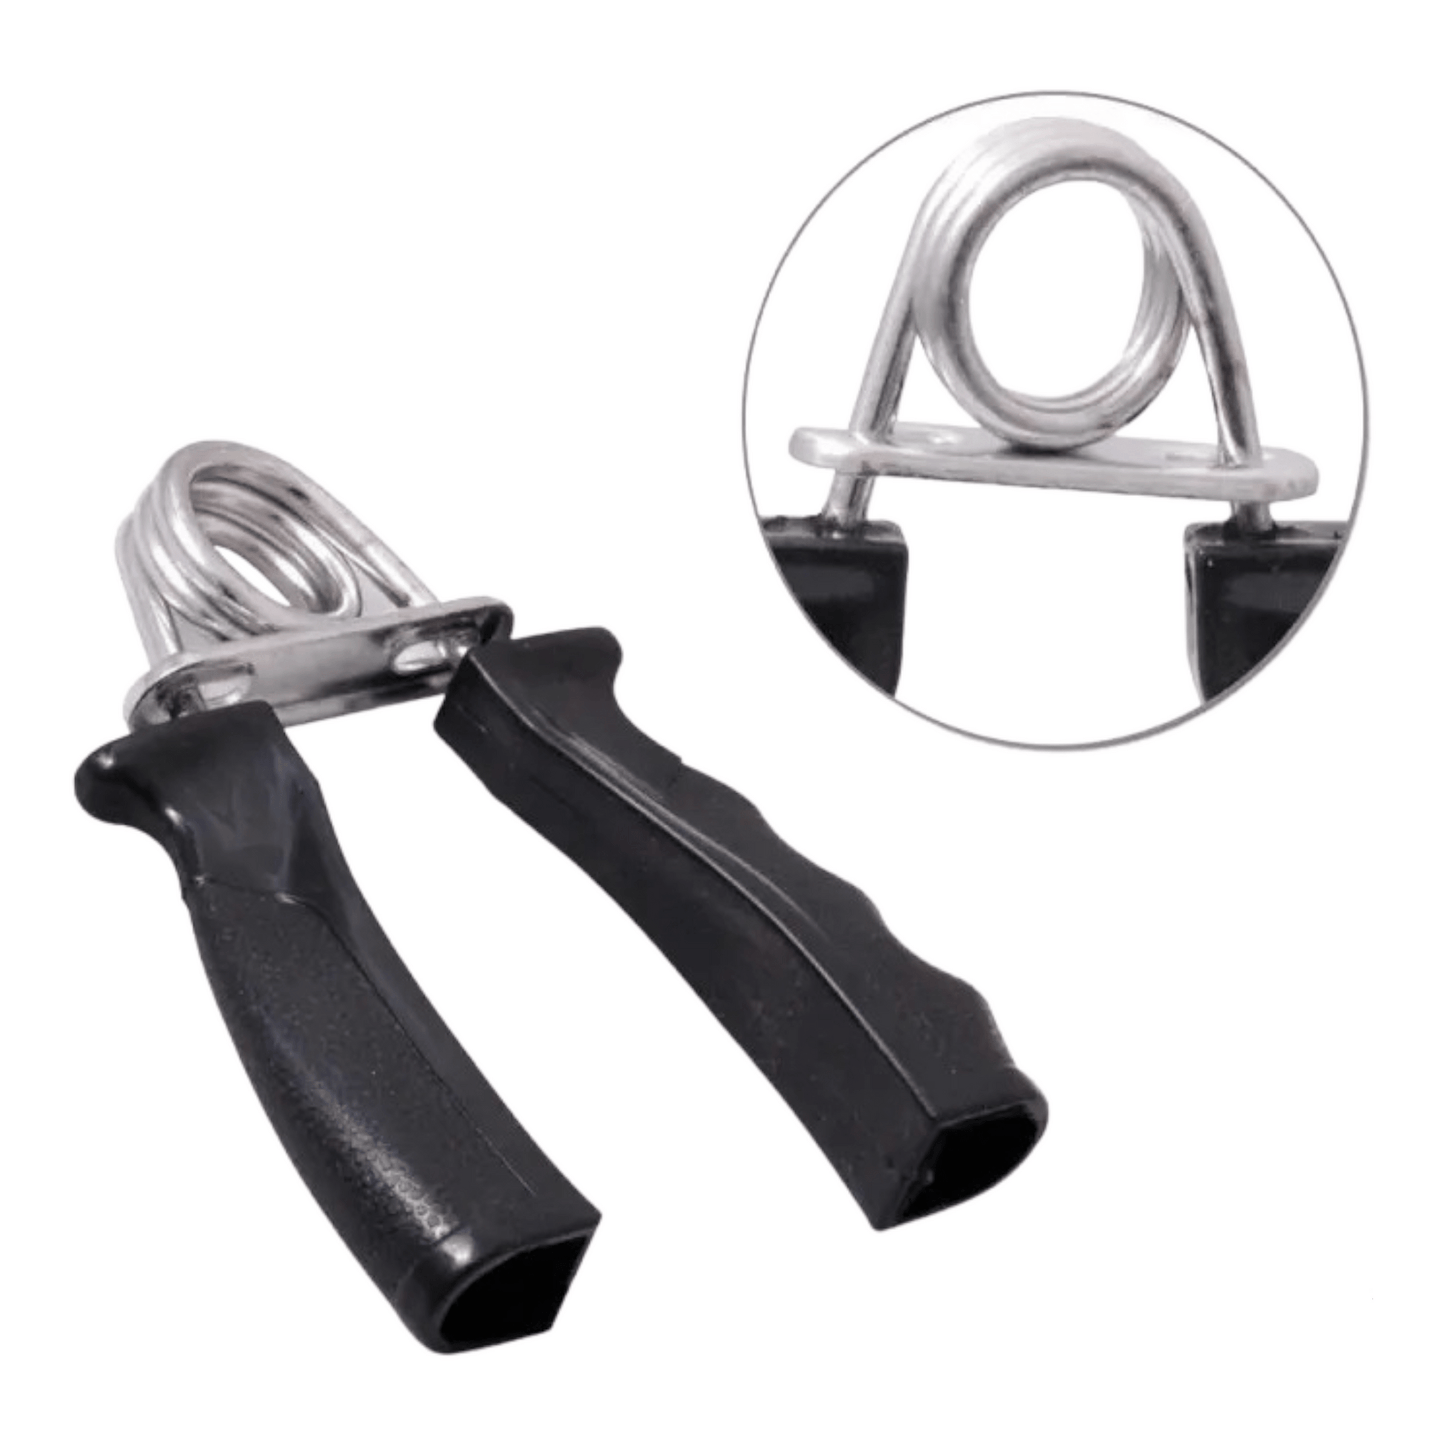 Hand Grip Strength Trainer- Pack of 2 - Valetica Sports